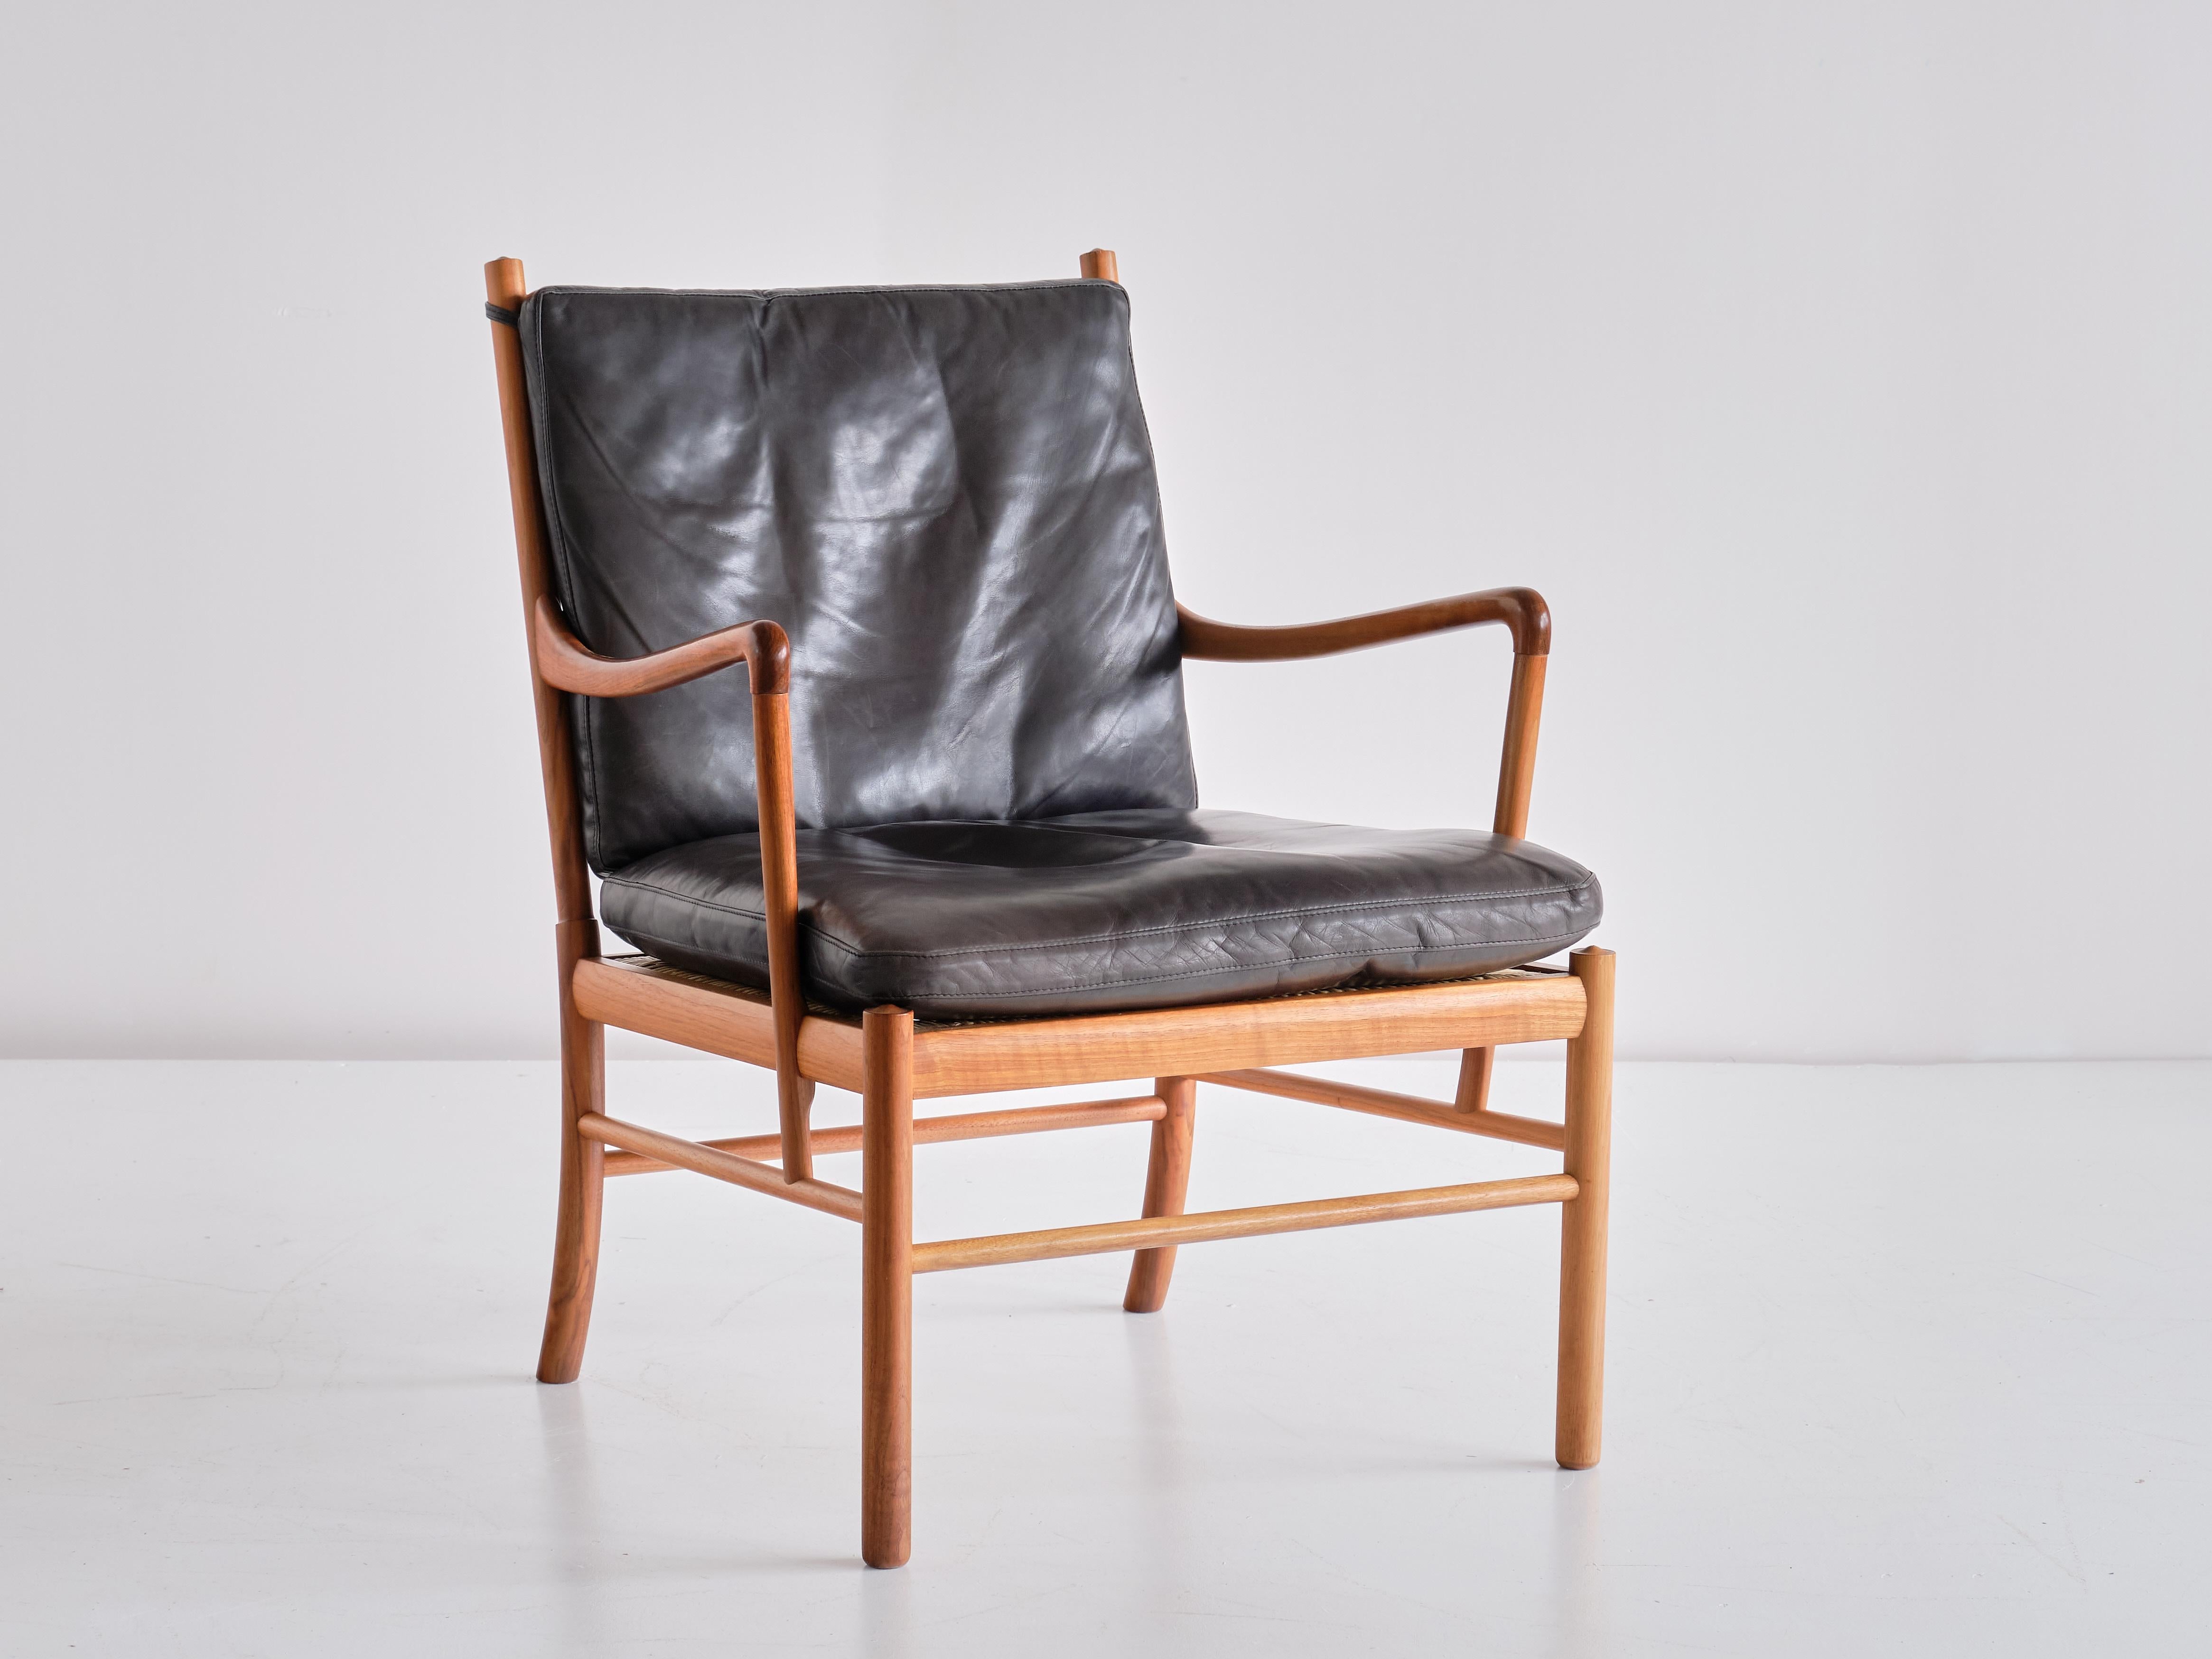 Leather Pair of Ole Wanscher Colonial Armchairs in Walnut, P. Jeppesen, Denmark, 1950s